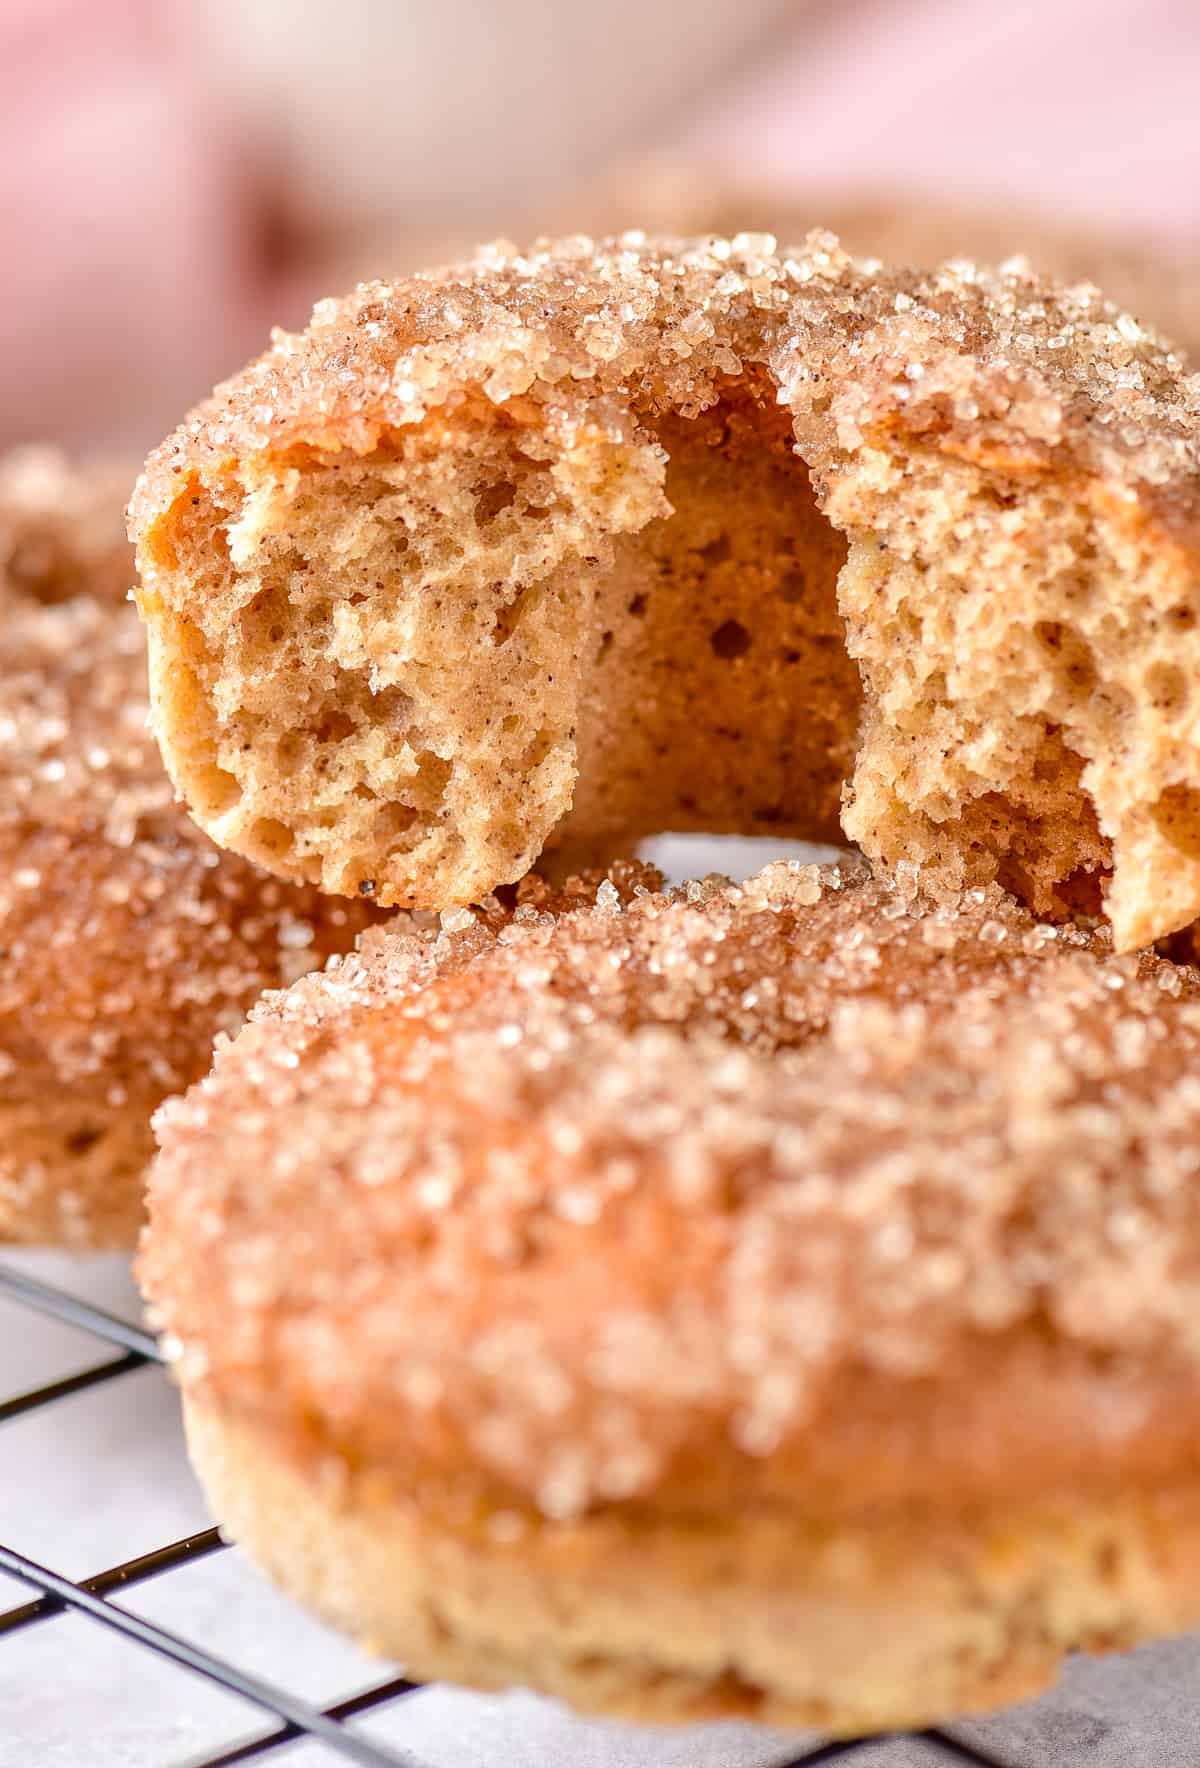 Close up stacked donuts with cinnamon sugar topping with top one split in half showing the fluffy inside.